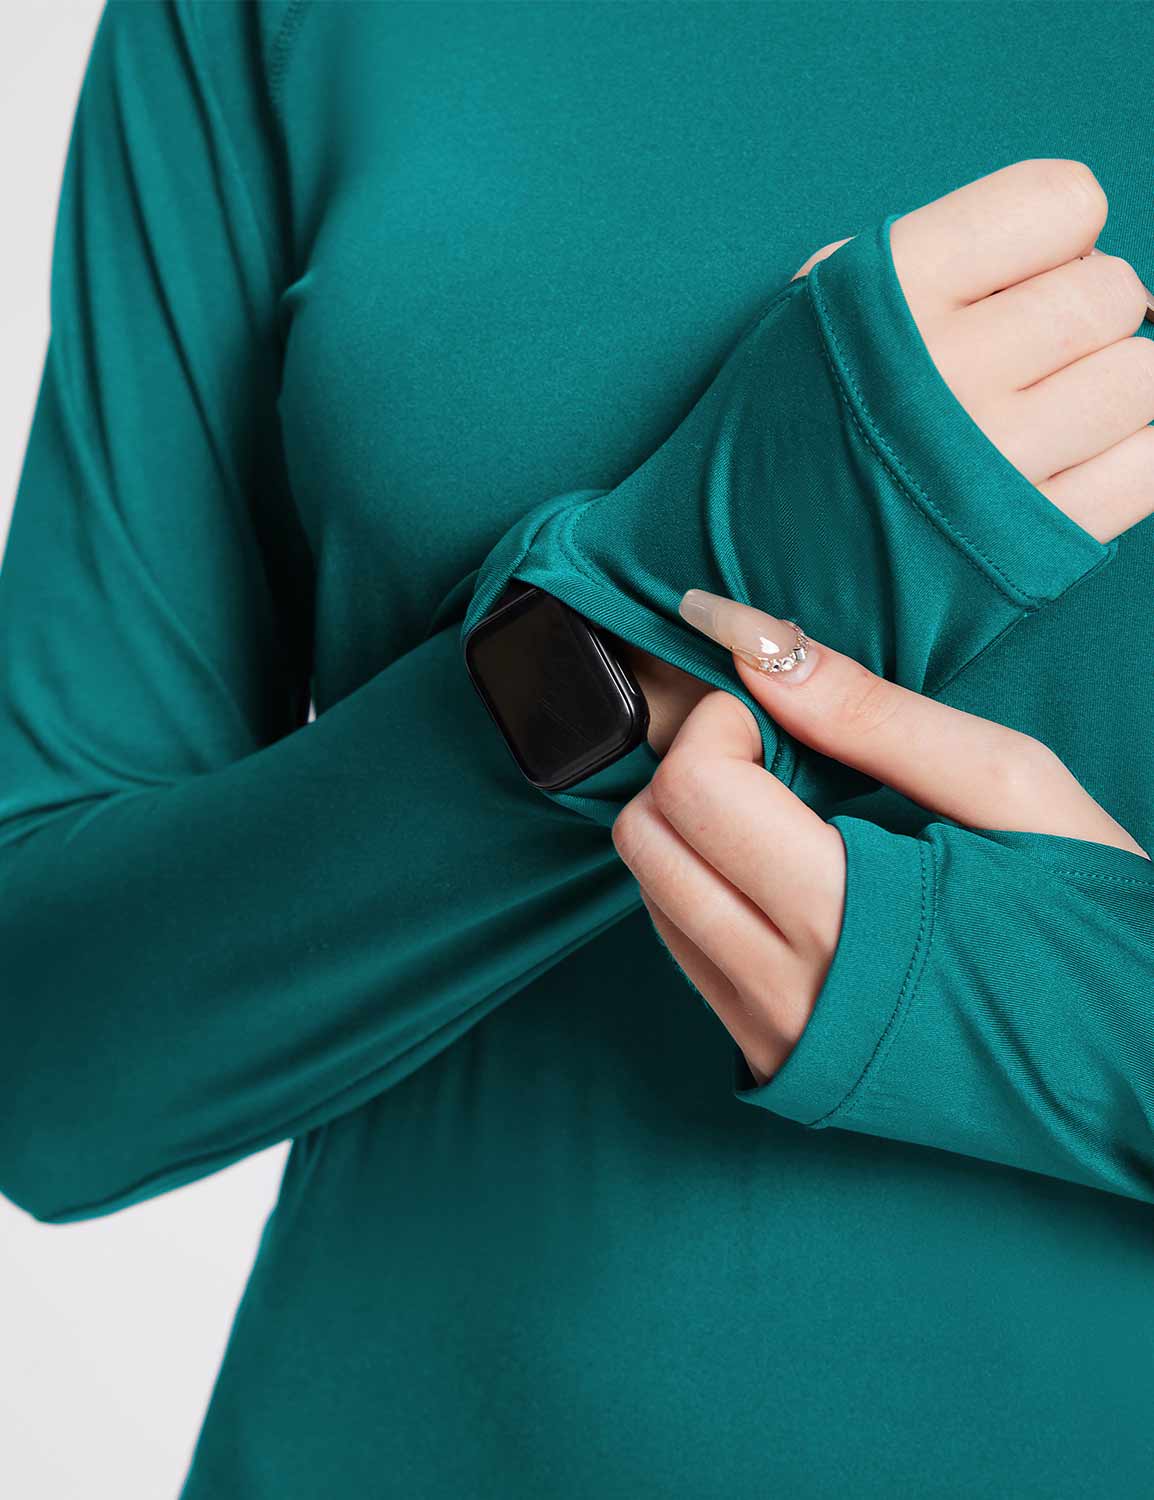 Baleaf Women's Crew Neck Long-Sleeve Sun Protection Shirts Teal Green with Watch Windows